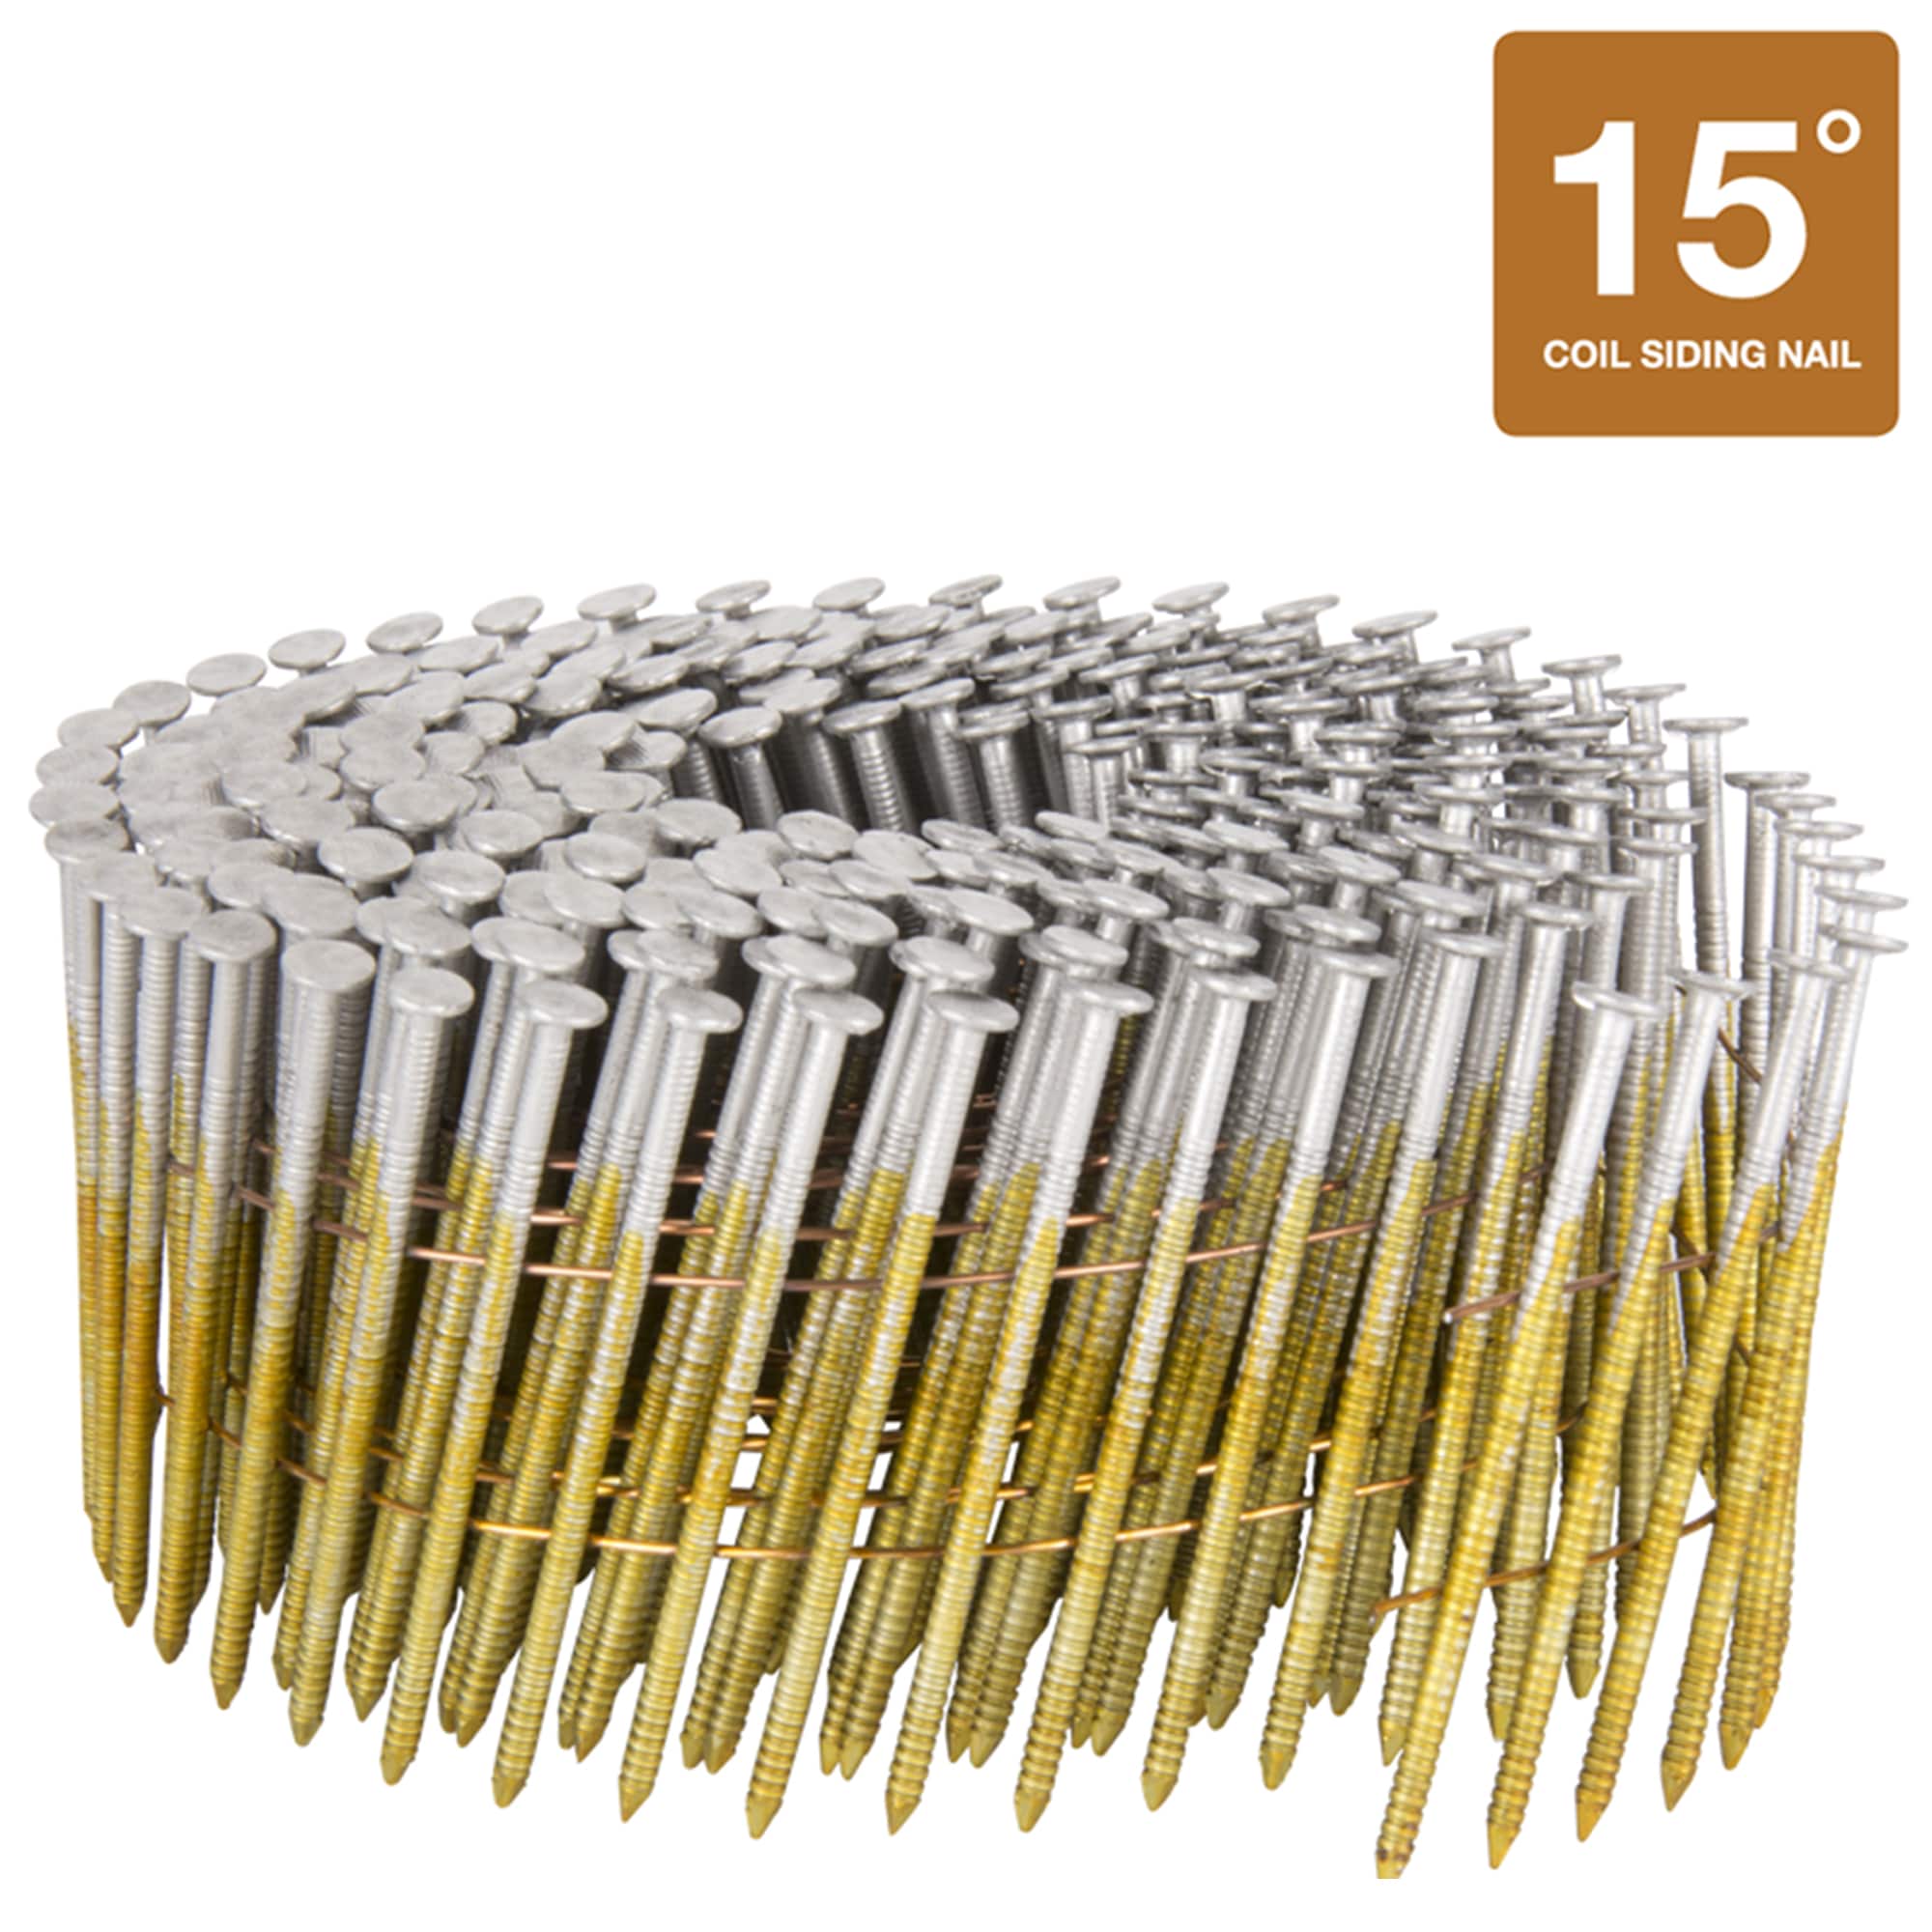 Tacwise Stainless Steel 2.1 x 32 mm Conical Coil Nails. 360 Nails | eBay